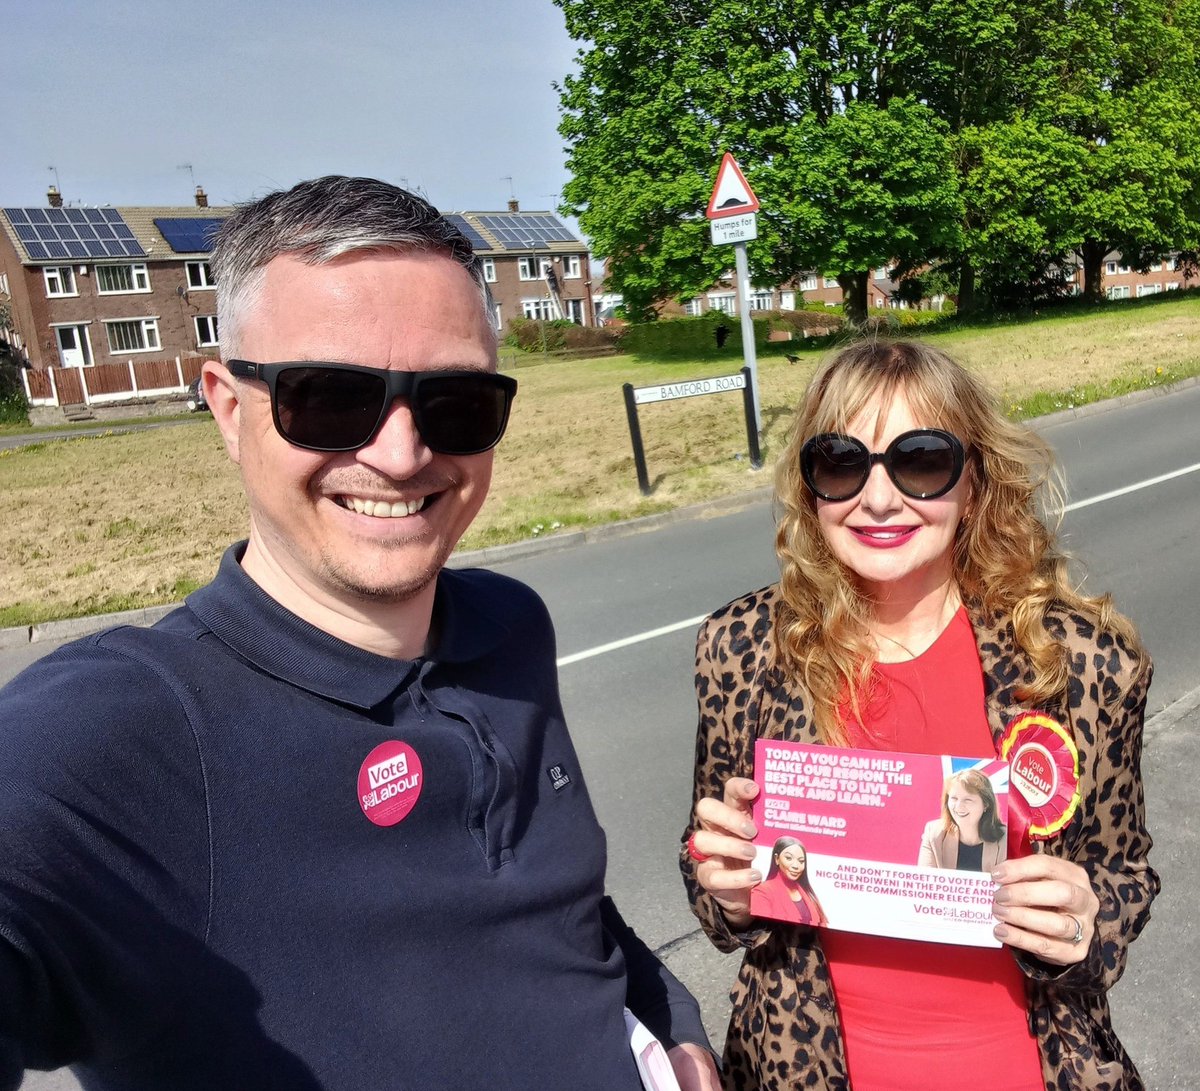 Canvassing in sunny Inkersall just now for @ClaireWard4EM and @NicolleNdiweni with Borough Cllr. @AllanOgle. Masses of support on the doorstep for #Labour - if you haven't done so yet, get out and vote for Claire and Nicolle - change is coming and not a minute too soon.